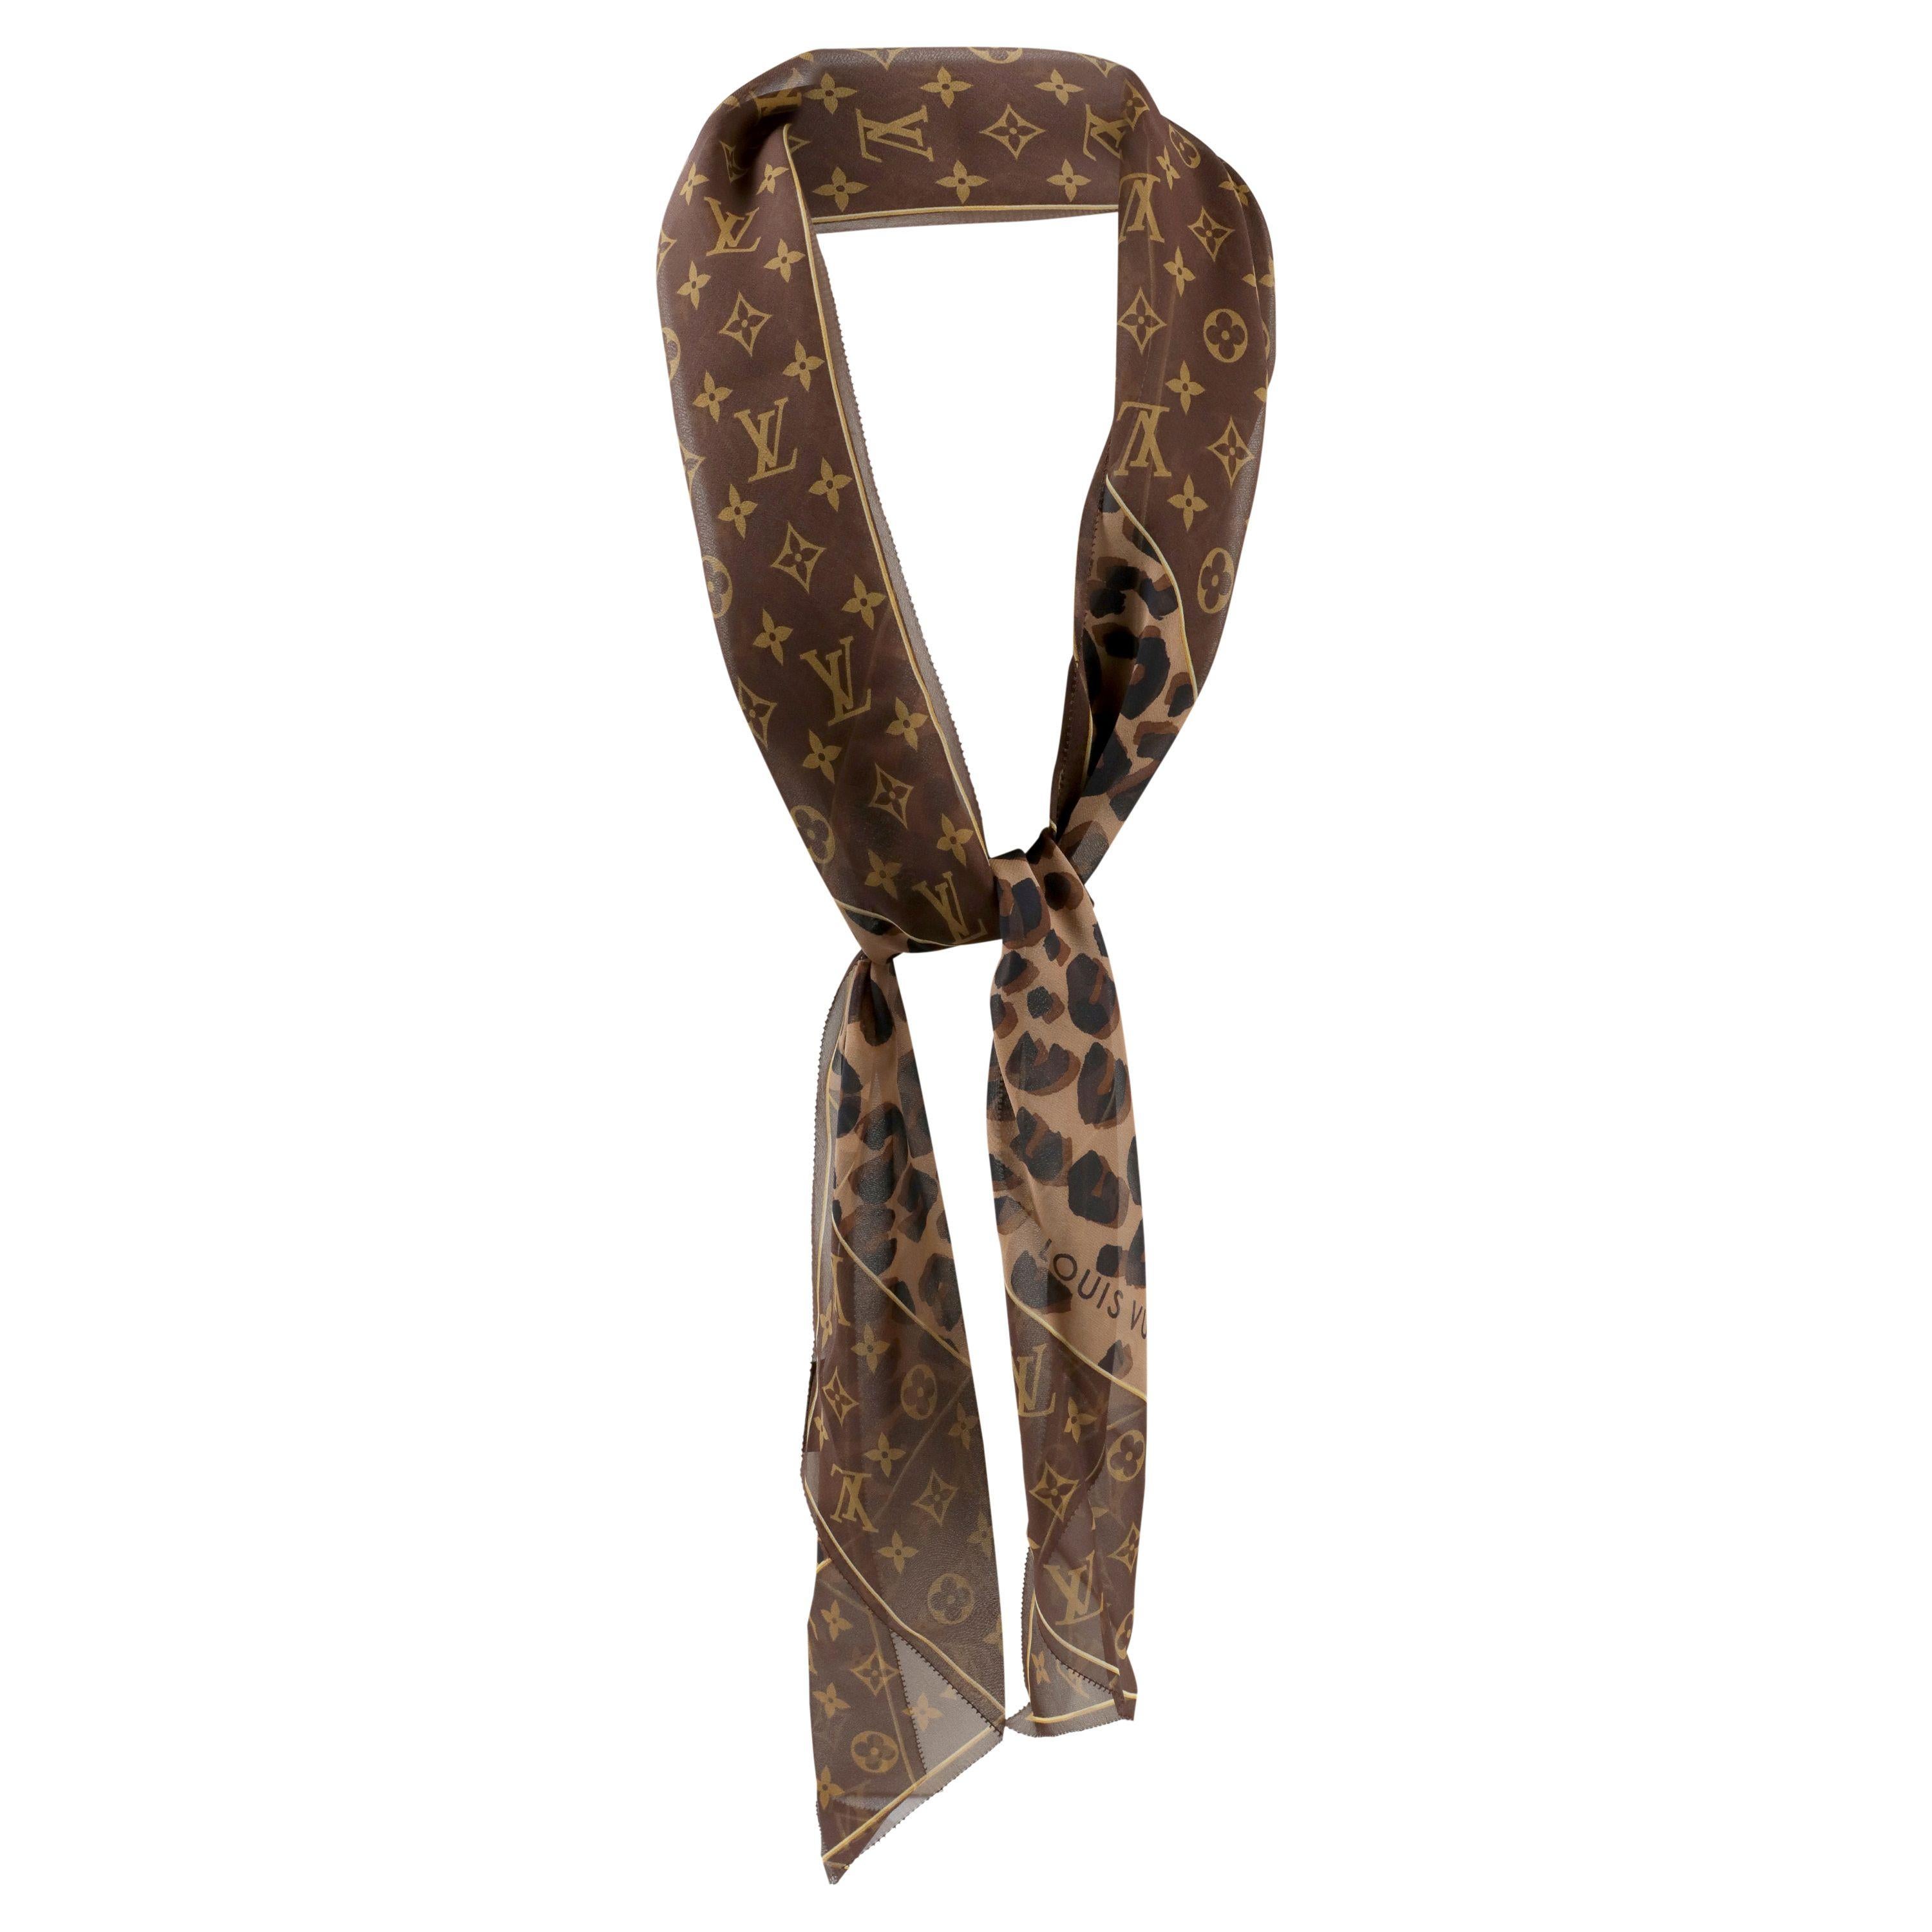 This authentic. Louis Vuitton Chiffon Cheetah Skinny Scarf is pristine.  Signature brown and tan LV monogram is incorporated with coordinating animal print.  Made in Italy.  
PBF 13927
